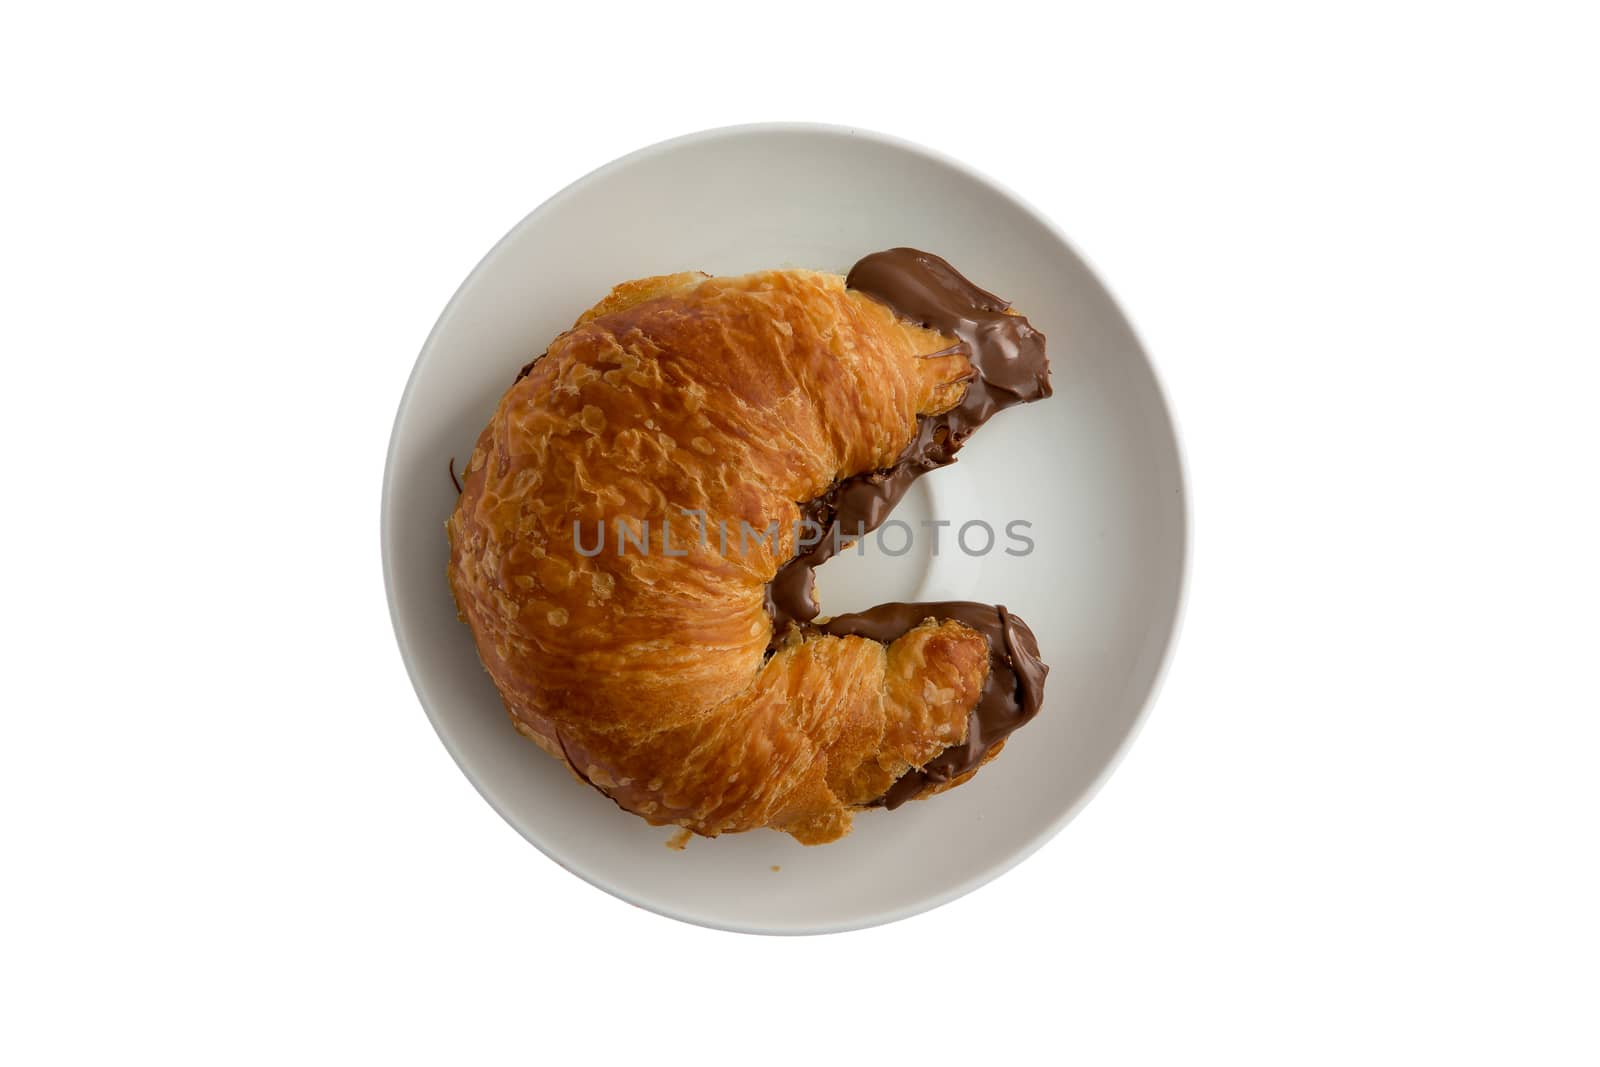 Freshly baked flaky buttery croissant by coskun